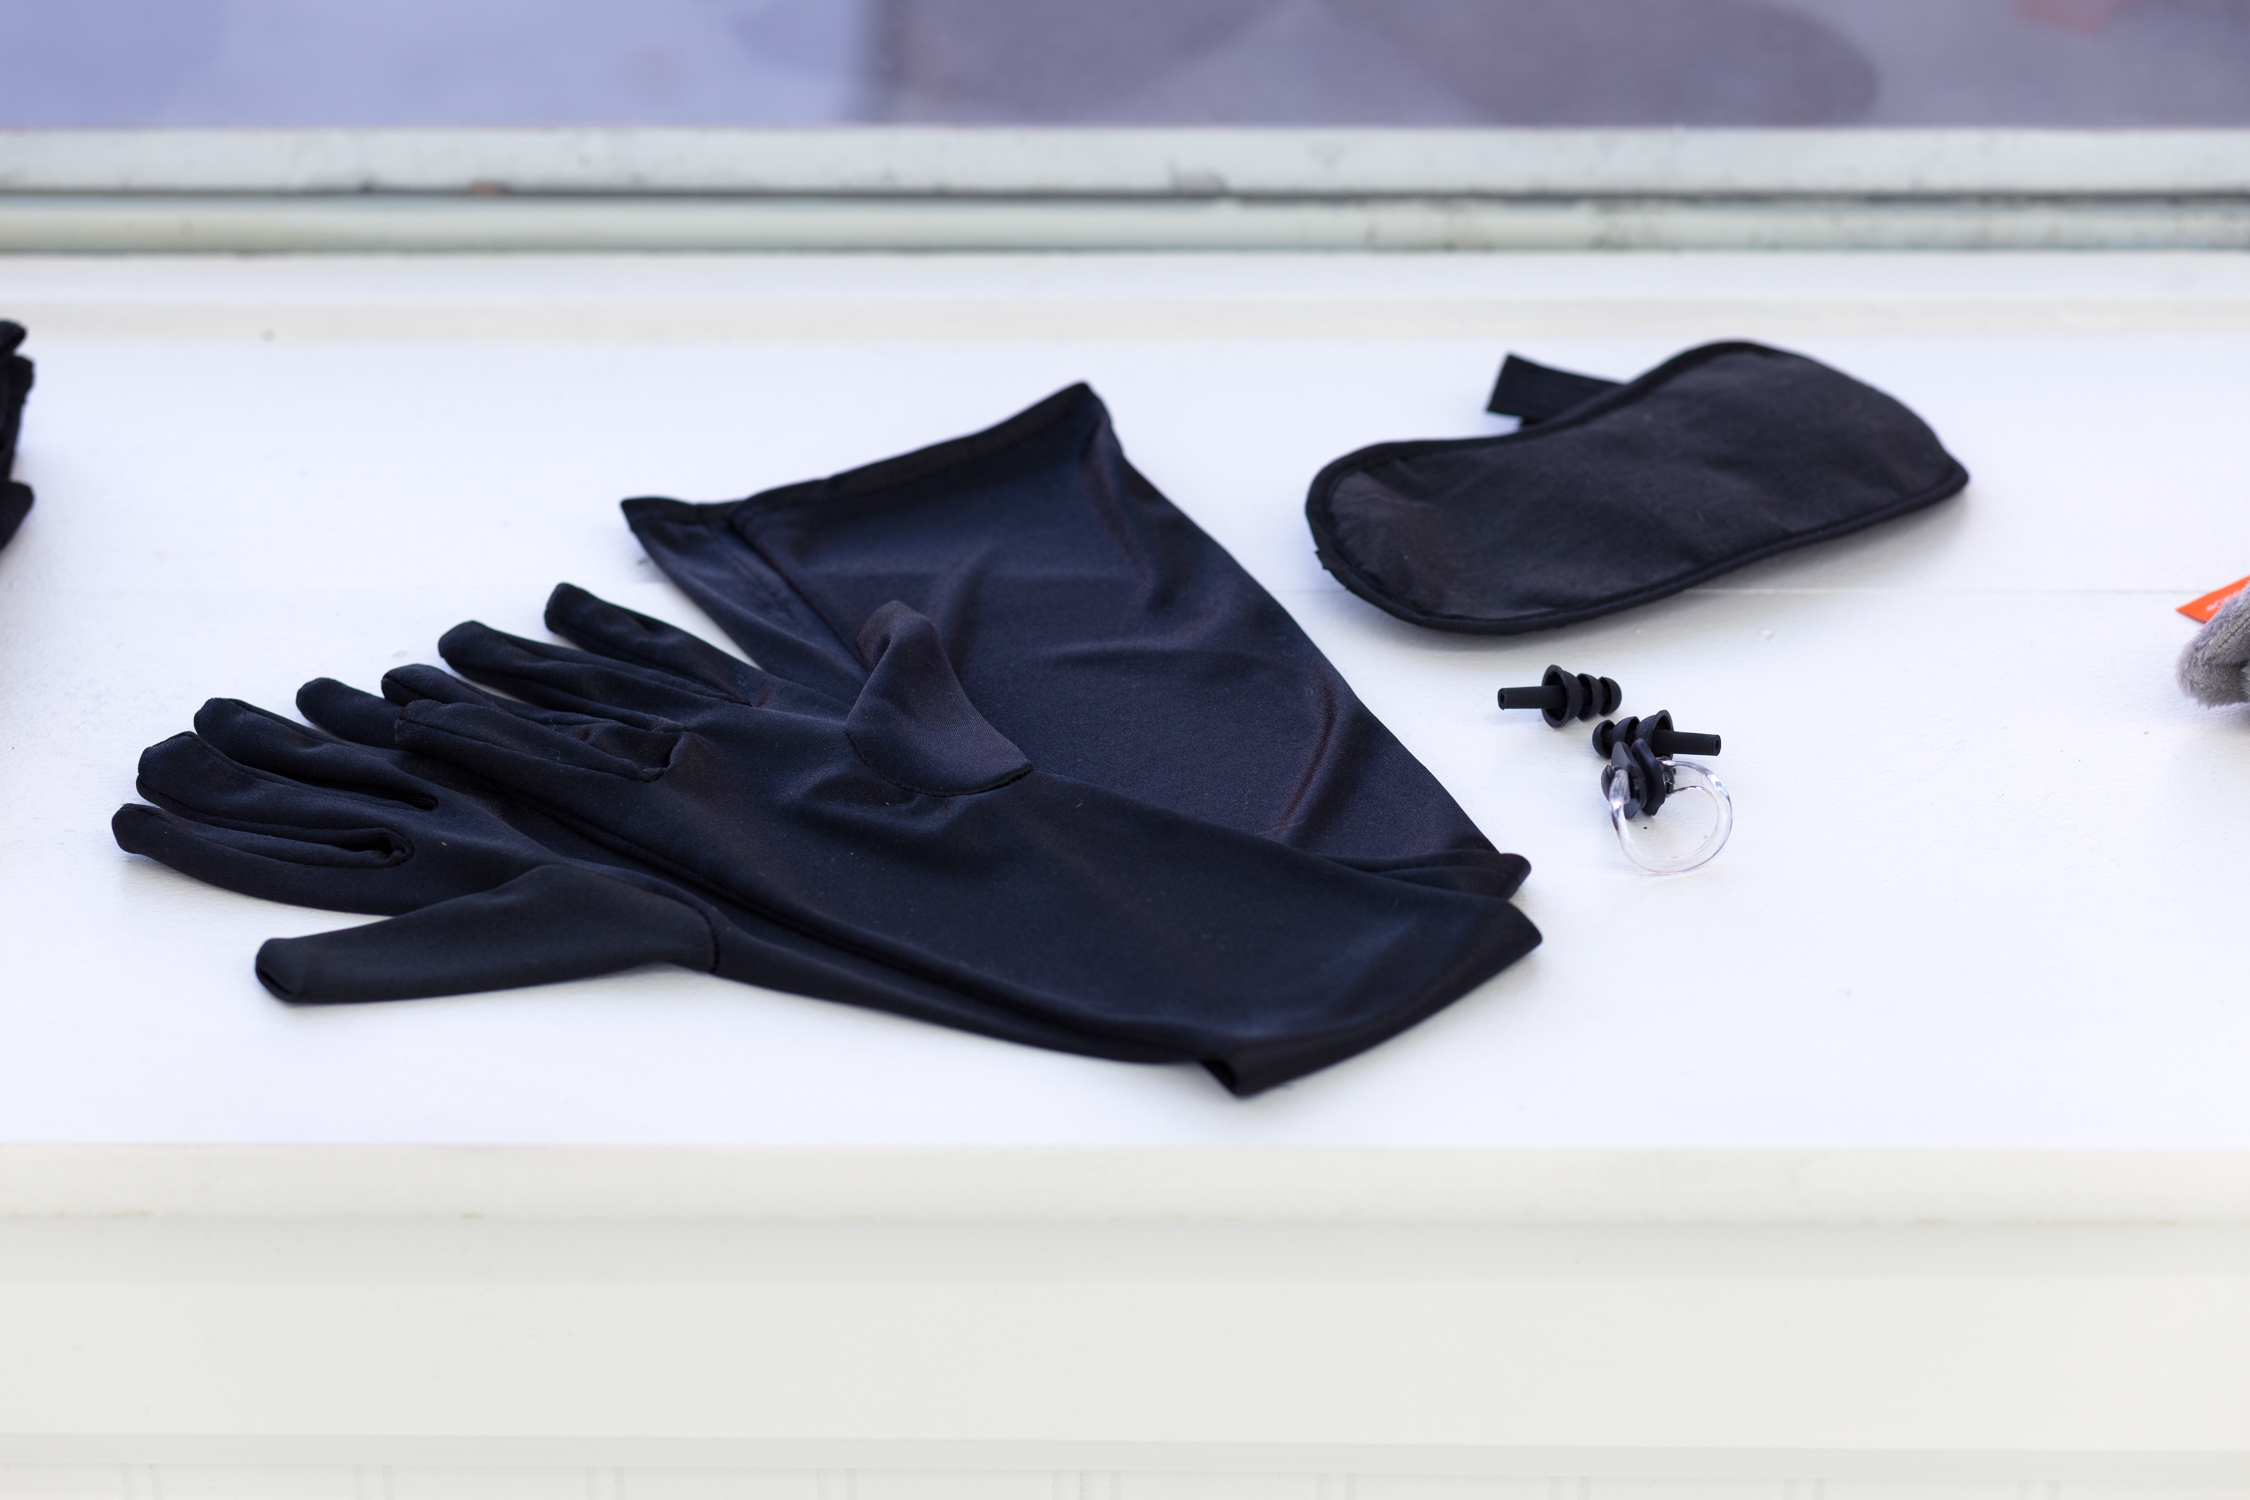 Black gloves, earplugs, a nose plug, and an eye mask sit in the windowsill